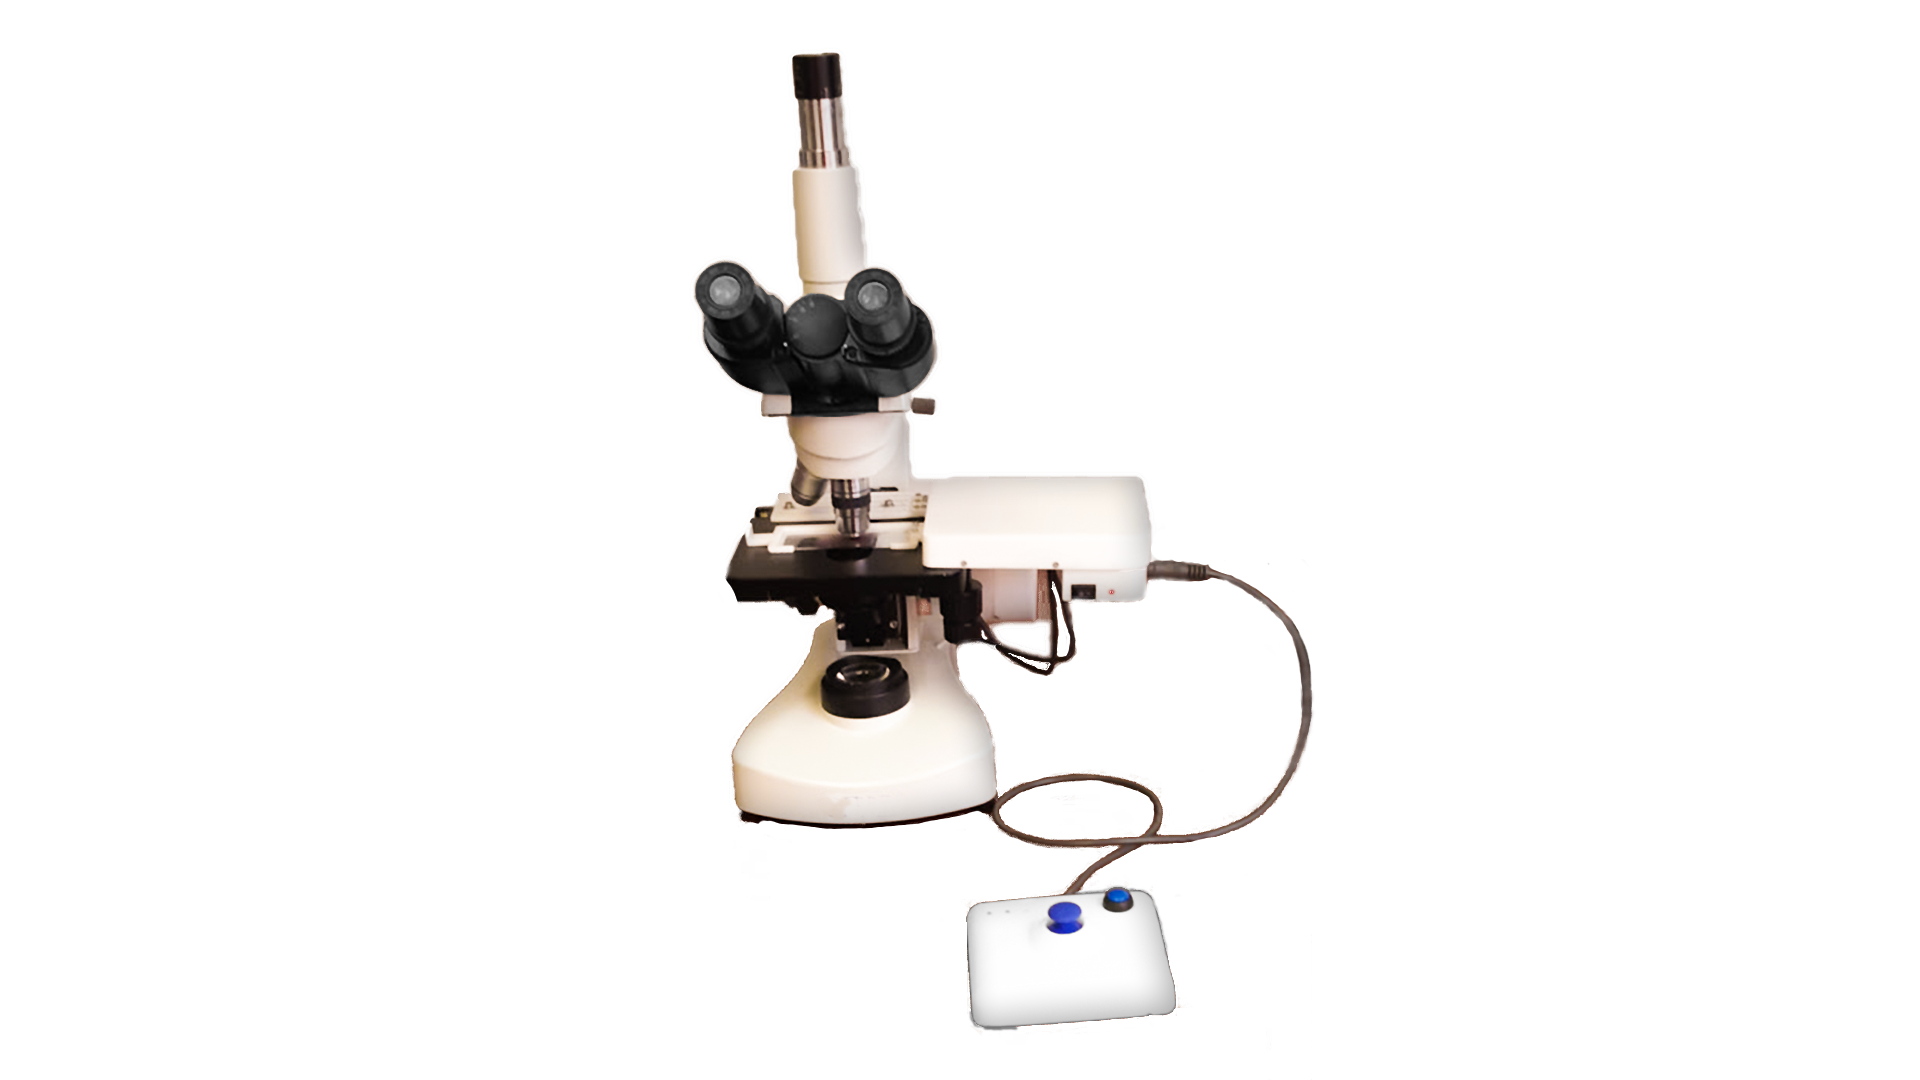 Microscope with add-ons